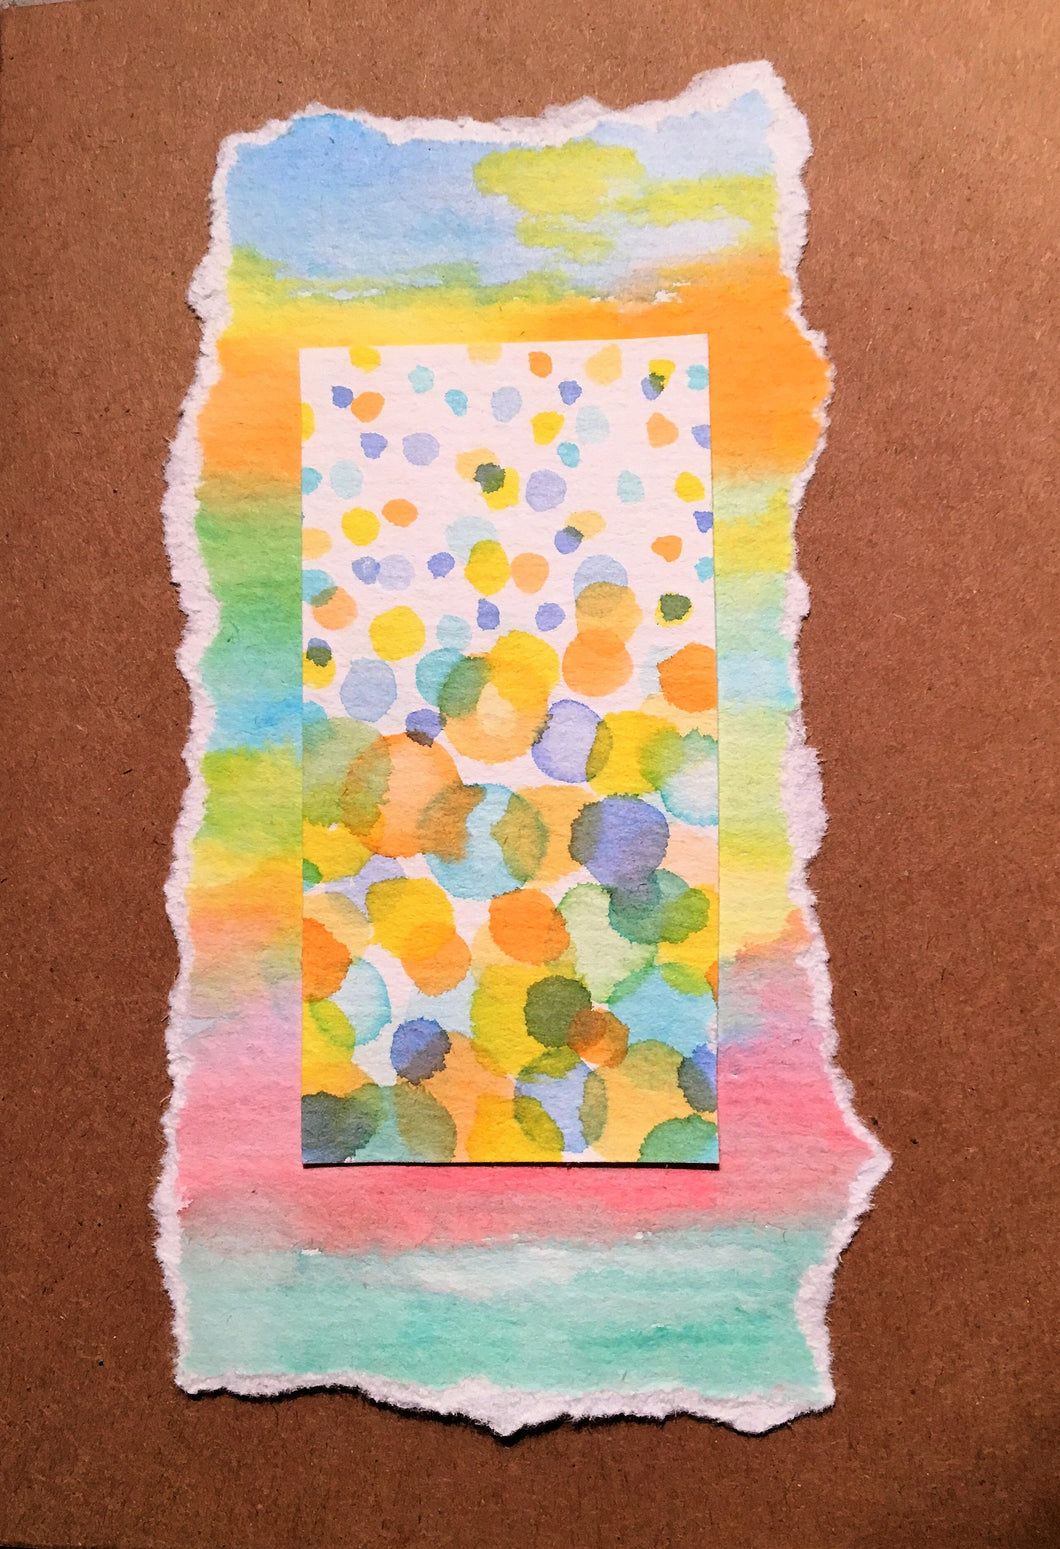 Handpainted Watercolour Greeting Card - Spots and Stripes - eDgE dEsiGn London